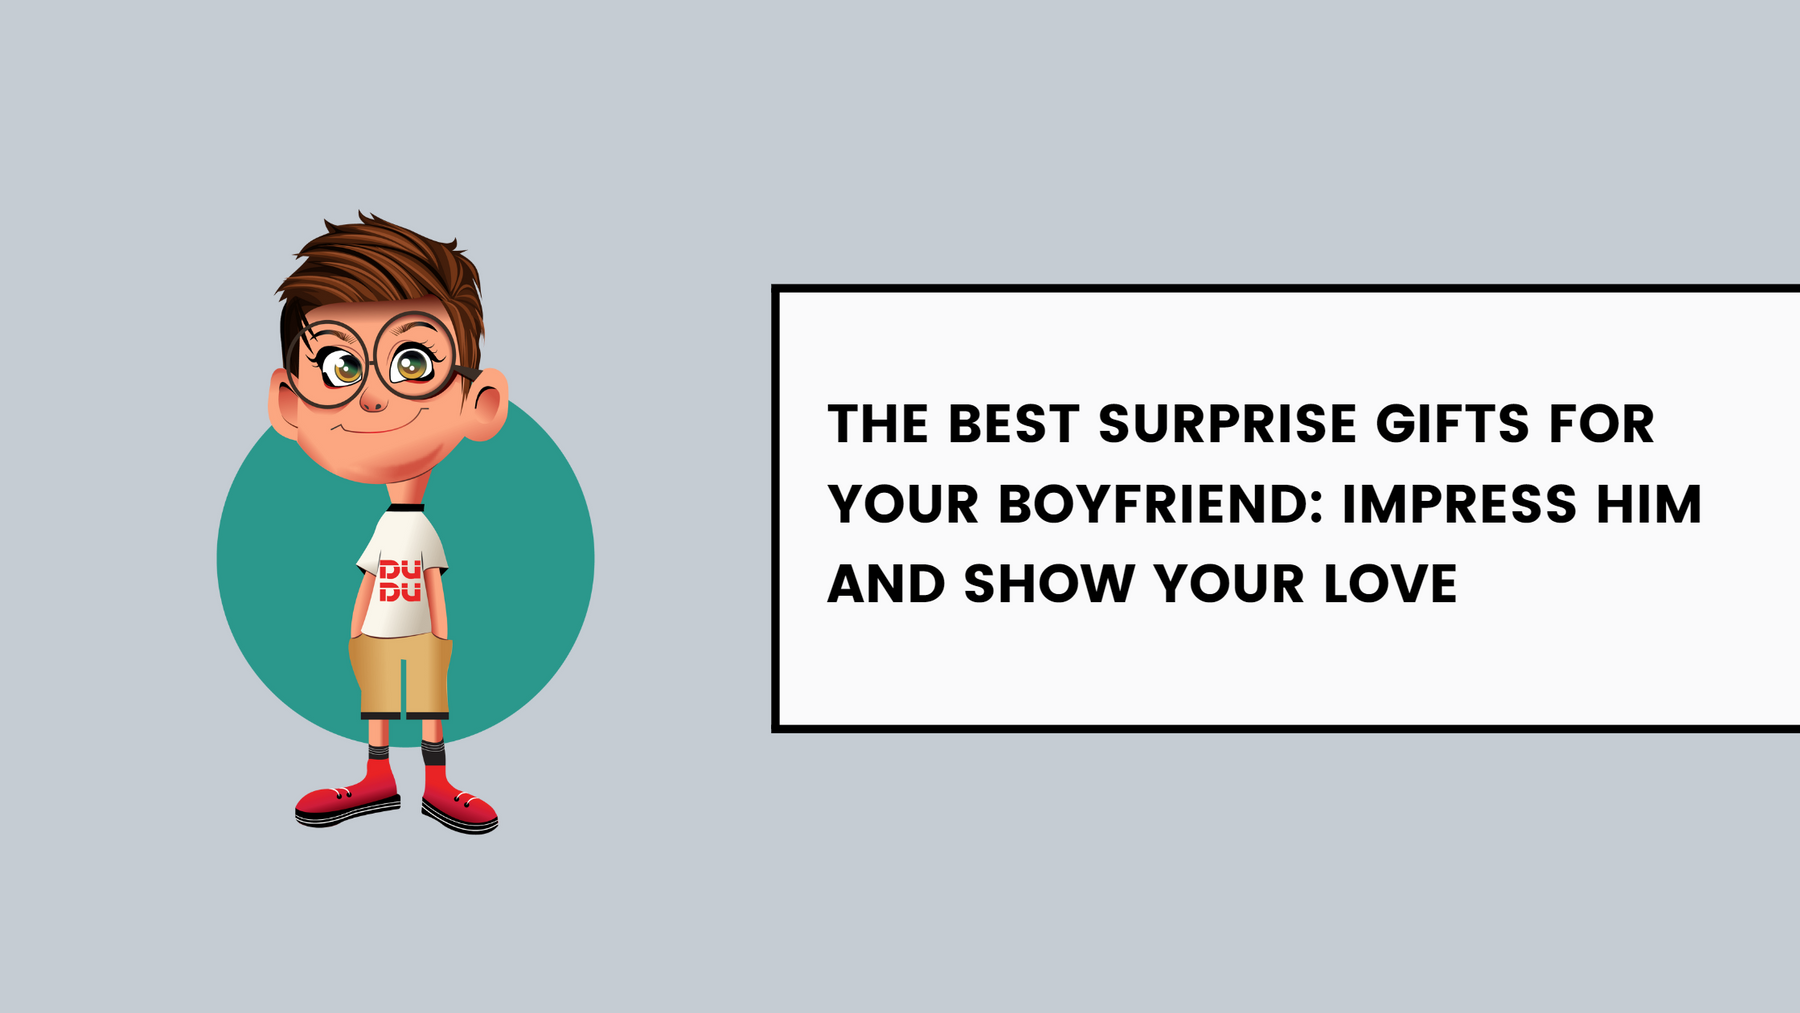 The Best Surprise Gifts For Your Boyfriend: Impress Him And Show Your Love